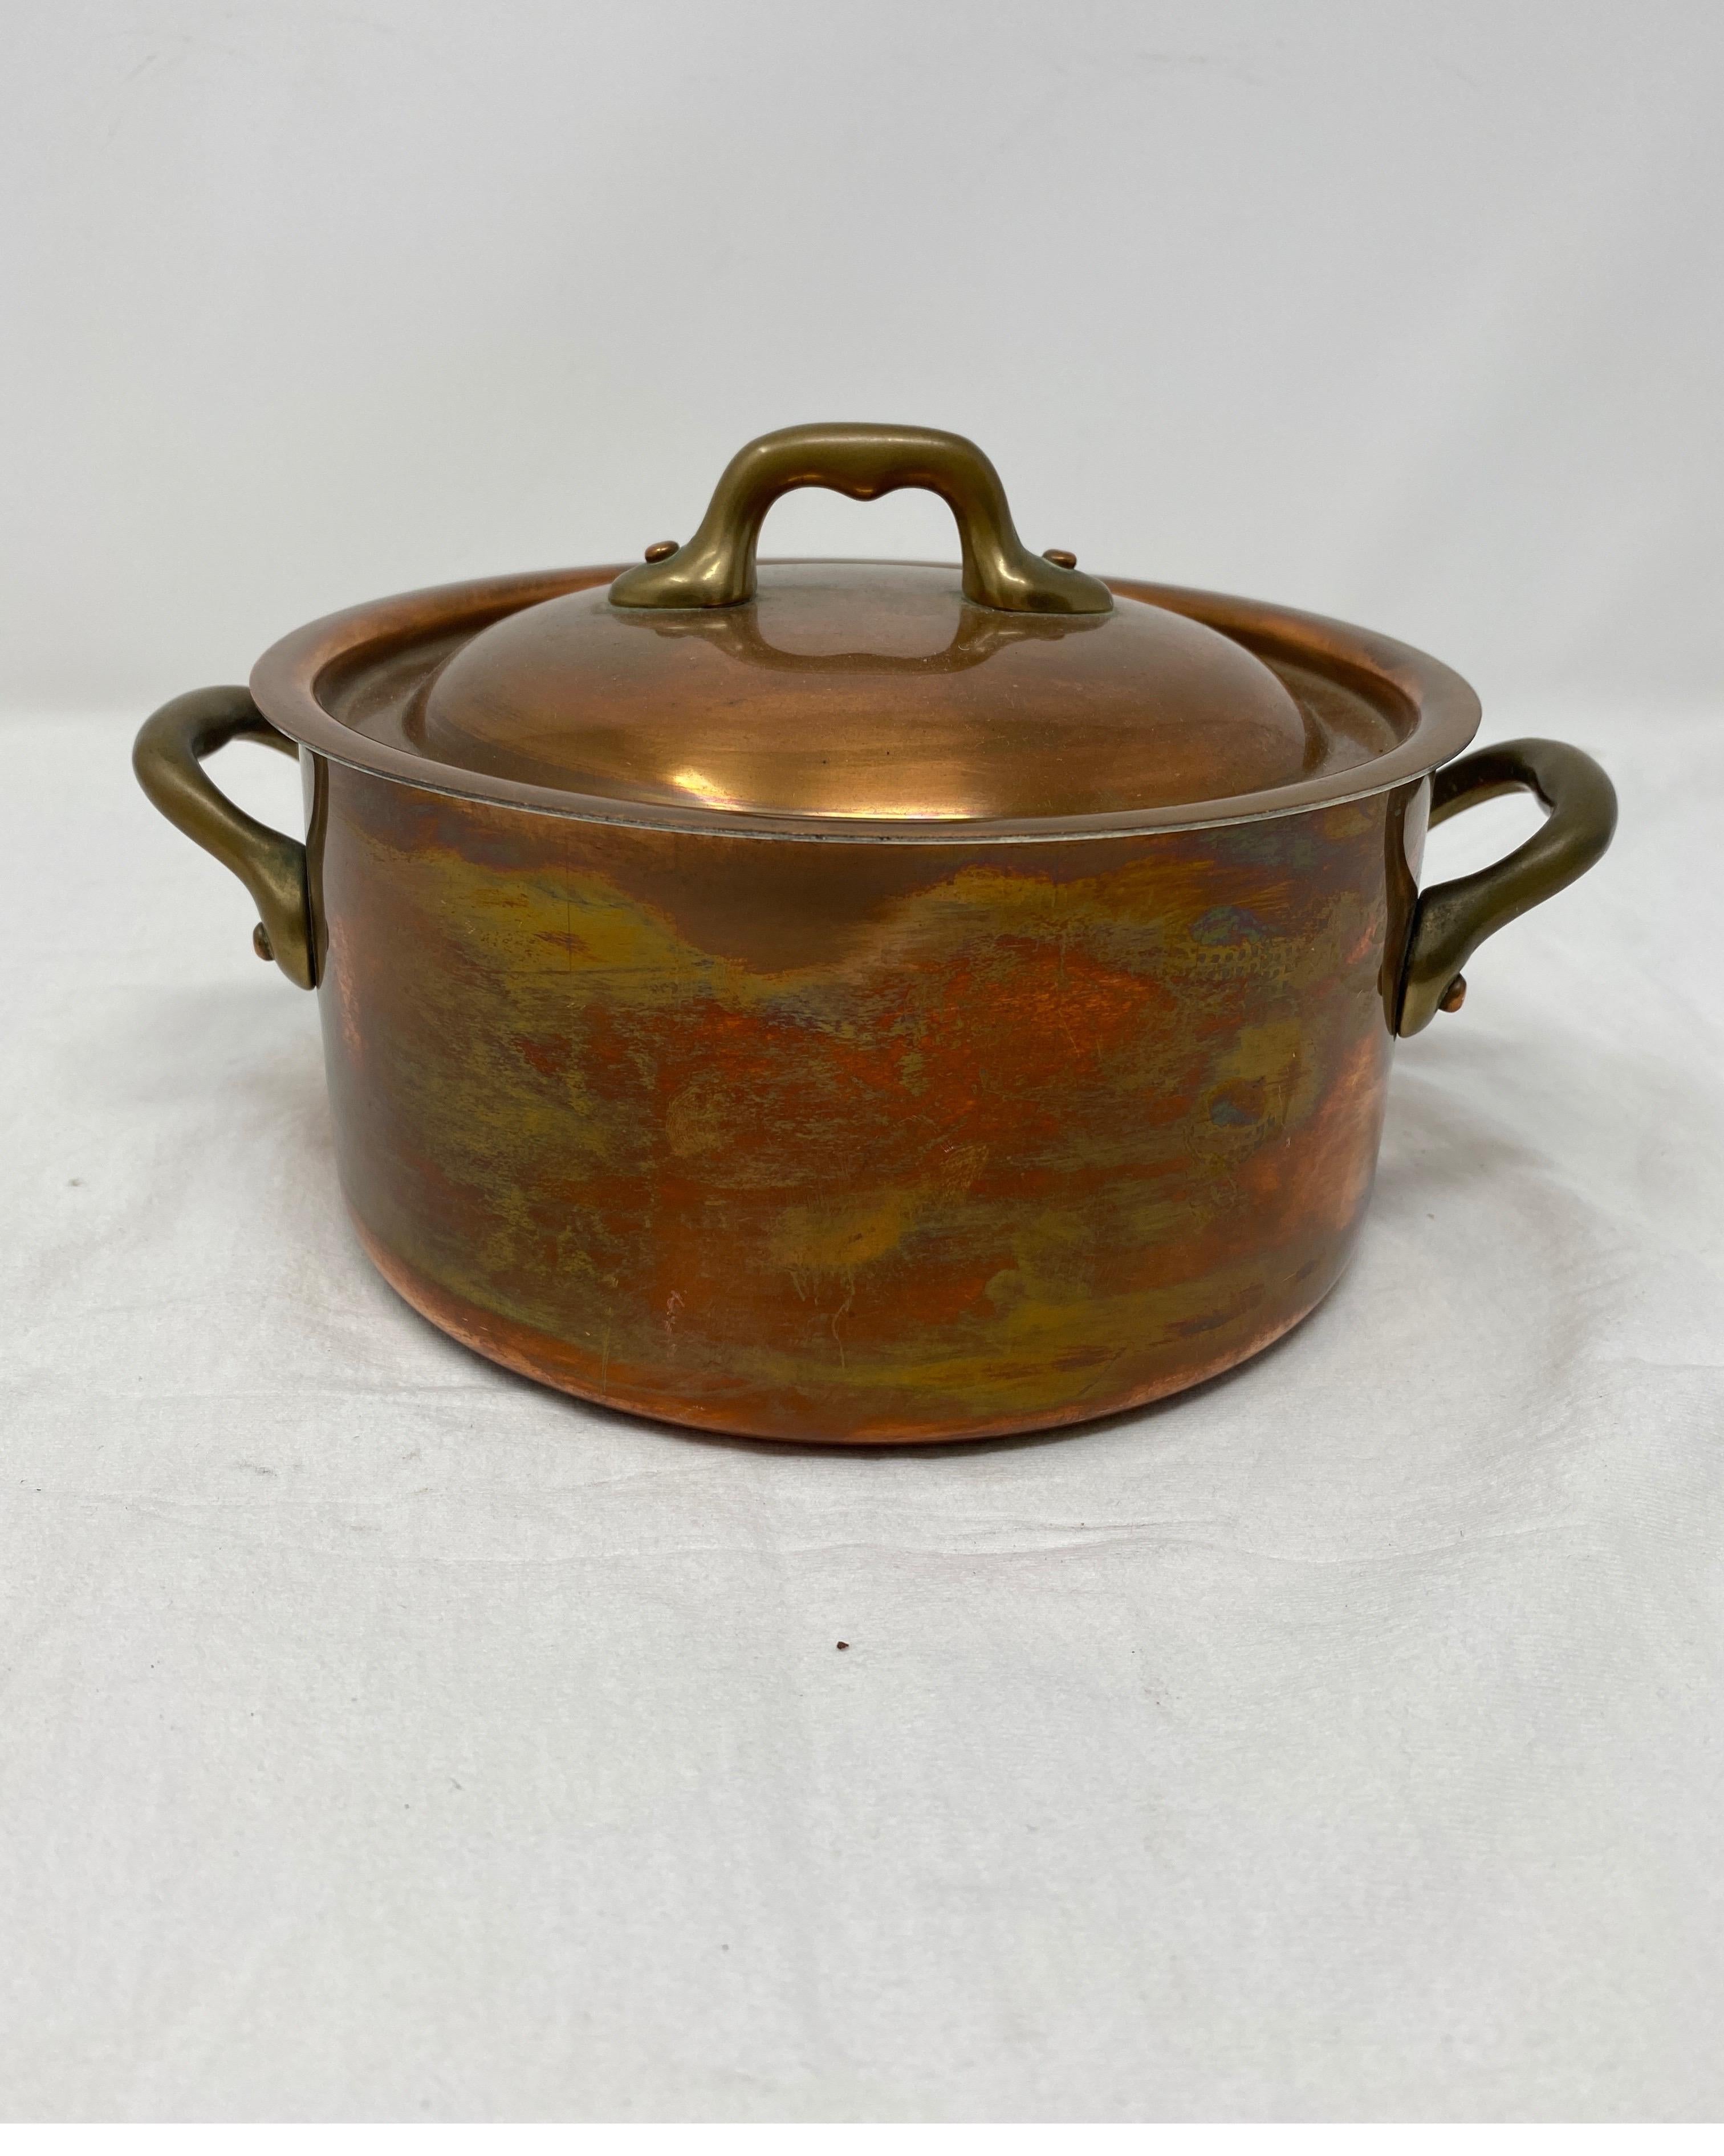 Small copper pot with brass handles and lid
Measures: 6 1/2” diameter x 3 1/4” height
4 1/2” height overall x 8 1/2” diameter overall. 

      